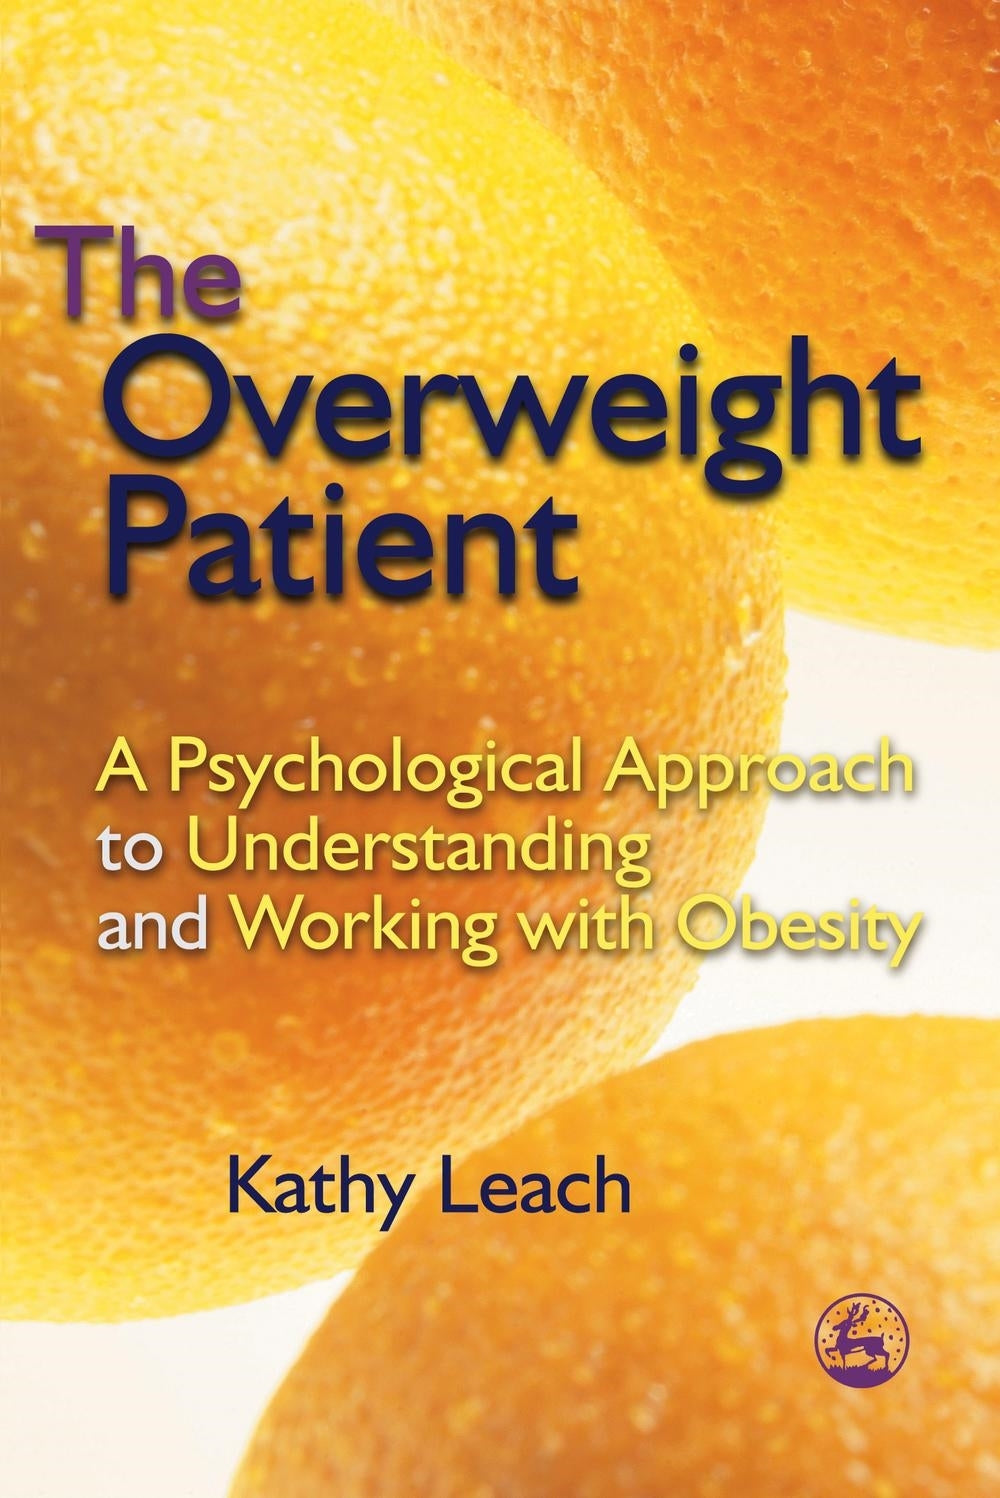 The Overweight Patient by Kathy Leach